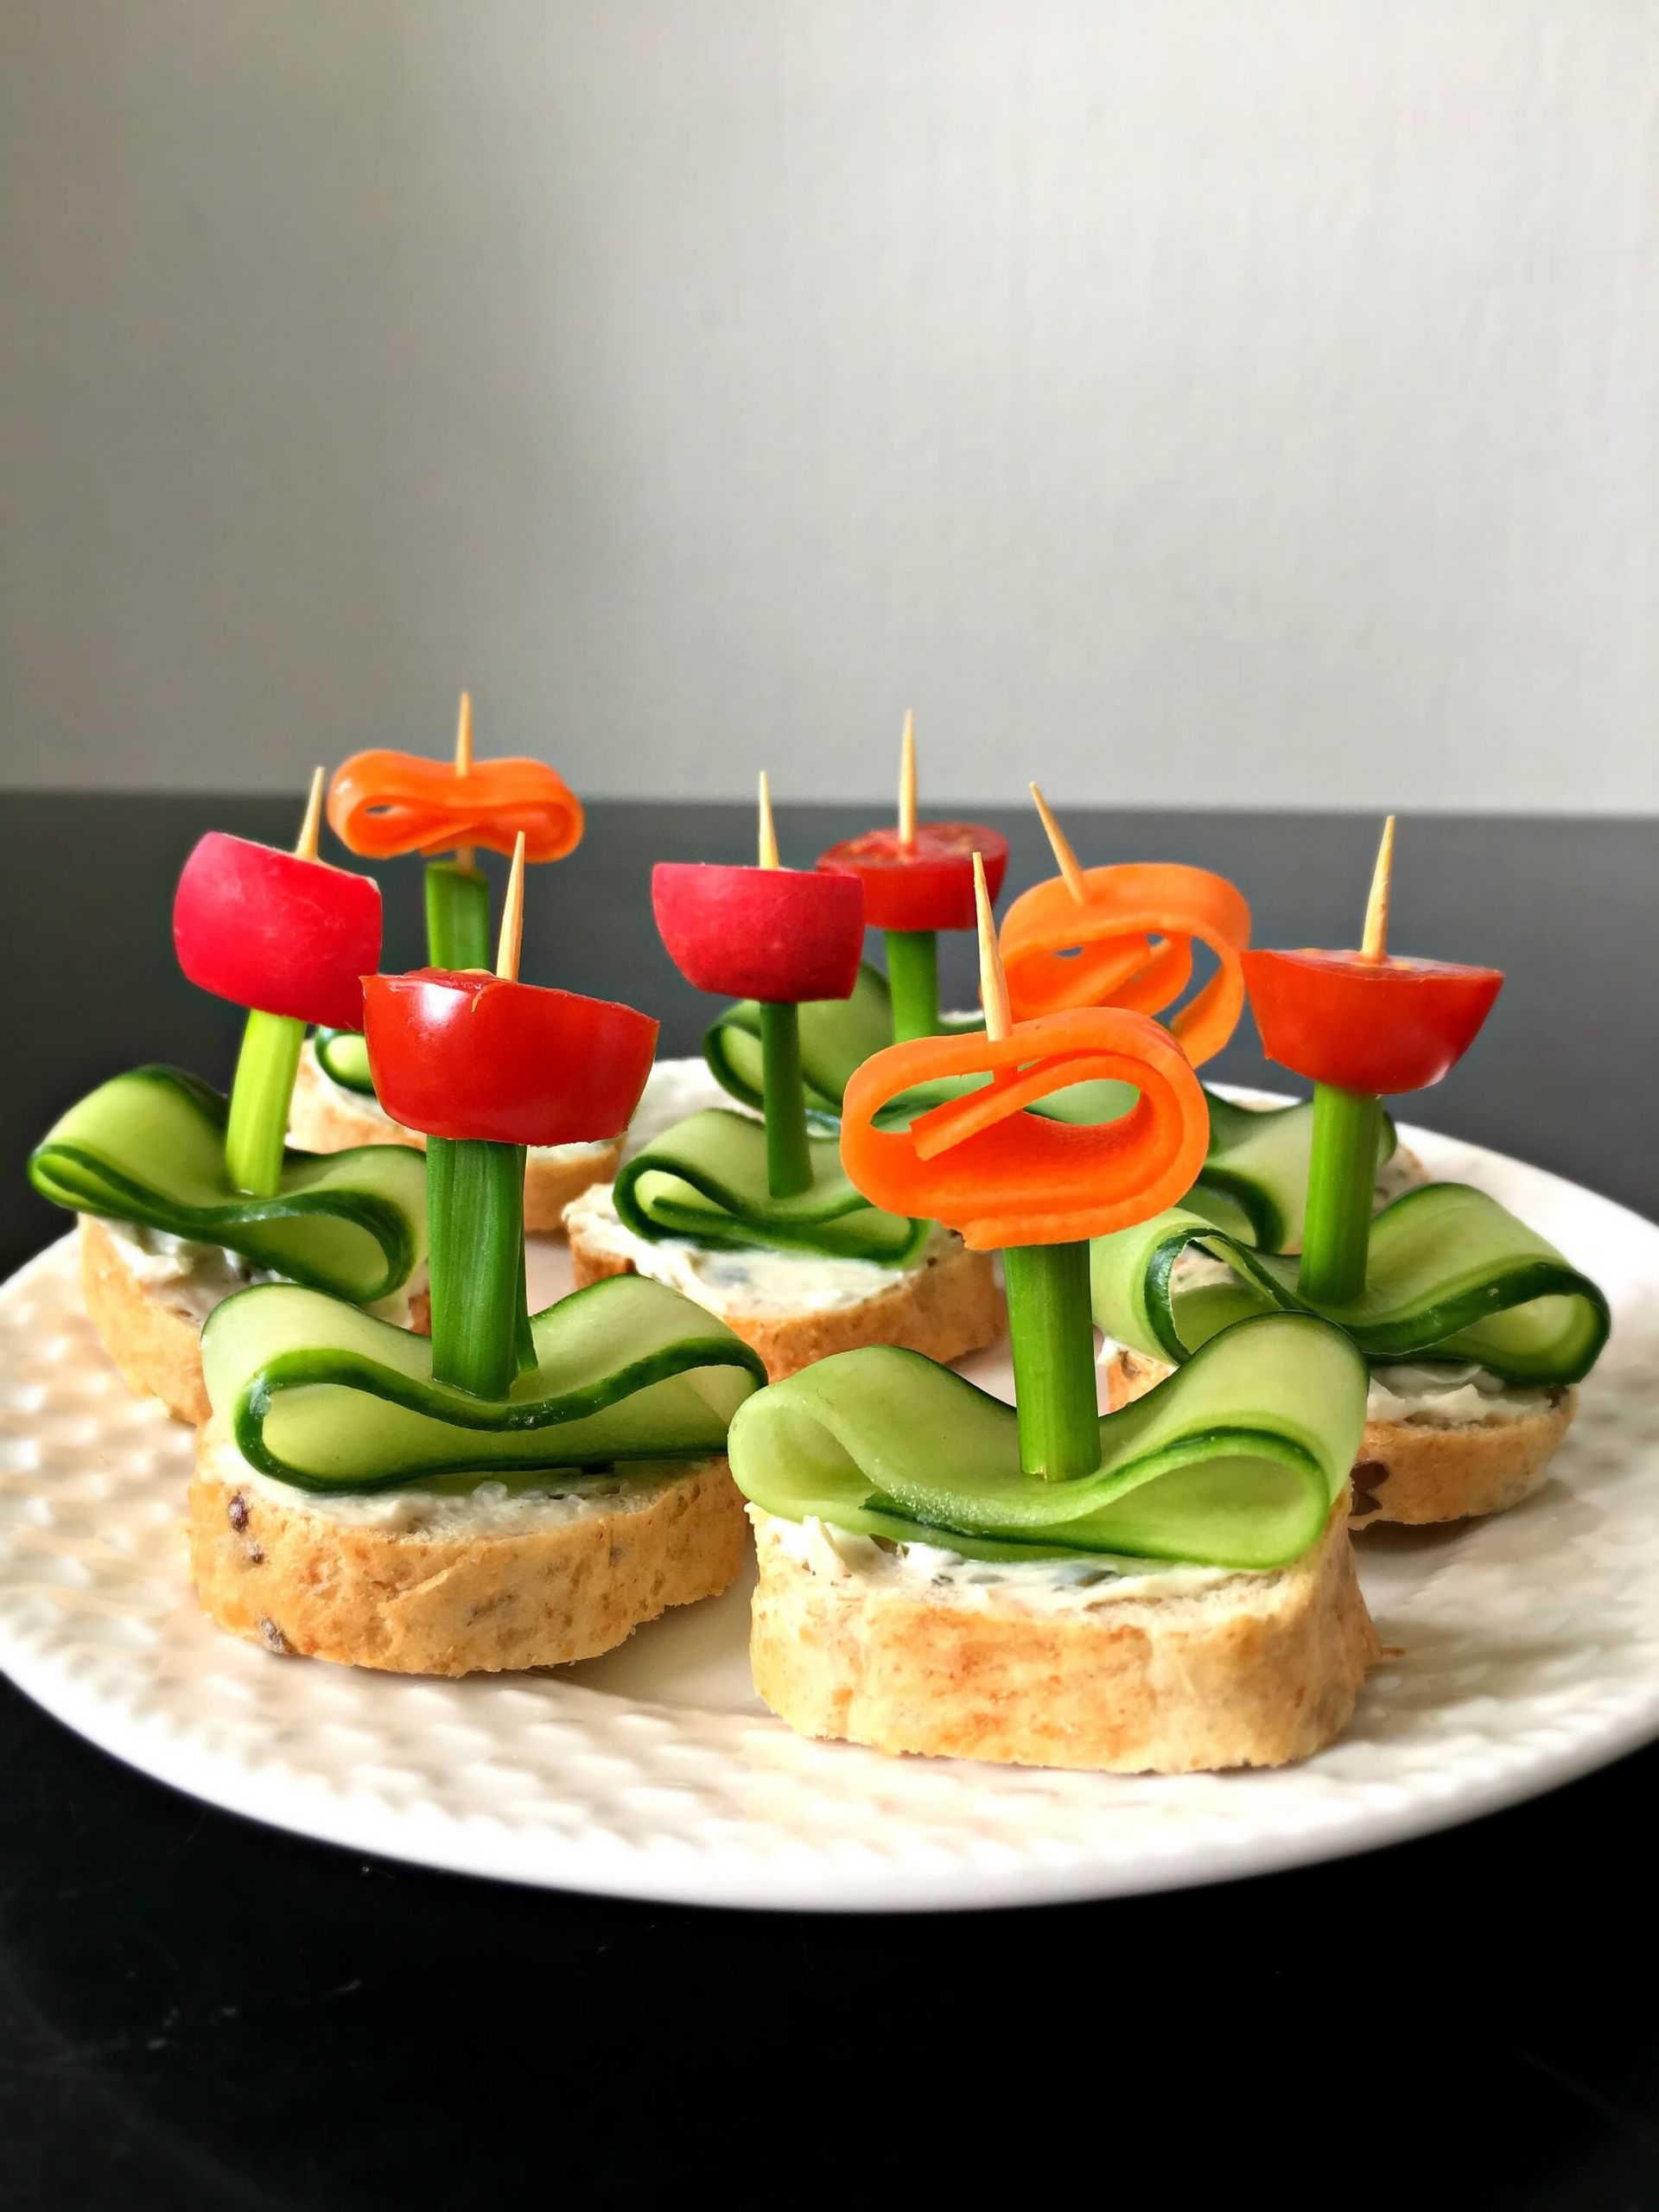 Easy Appetizers With Cream Cheese
 Vegan Flower Appetizers with Herb "Cream Cheese"